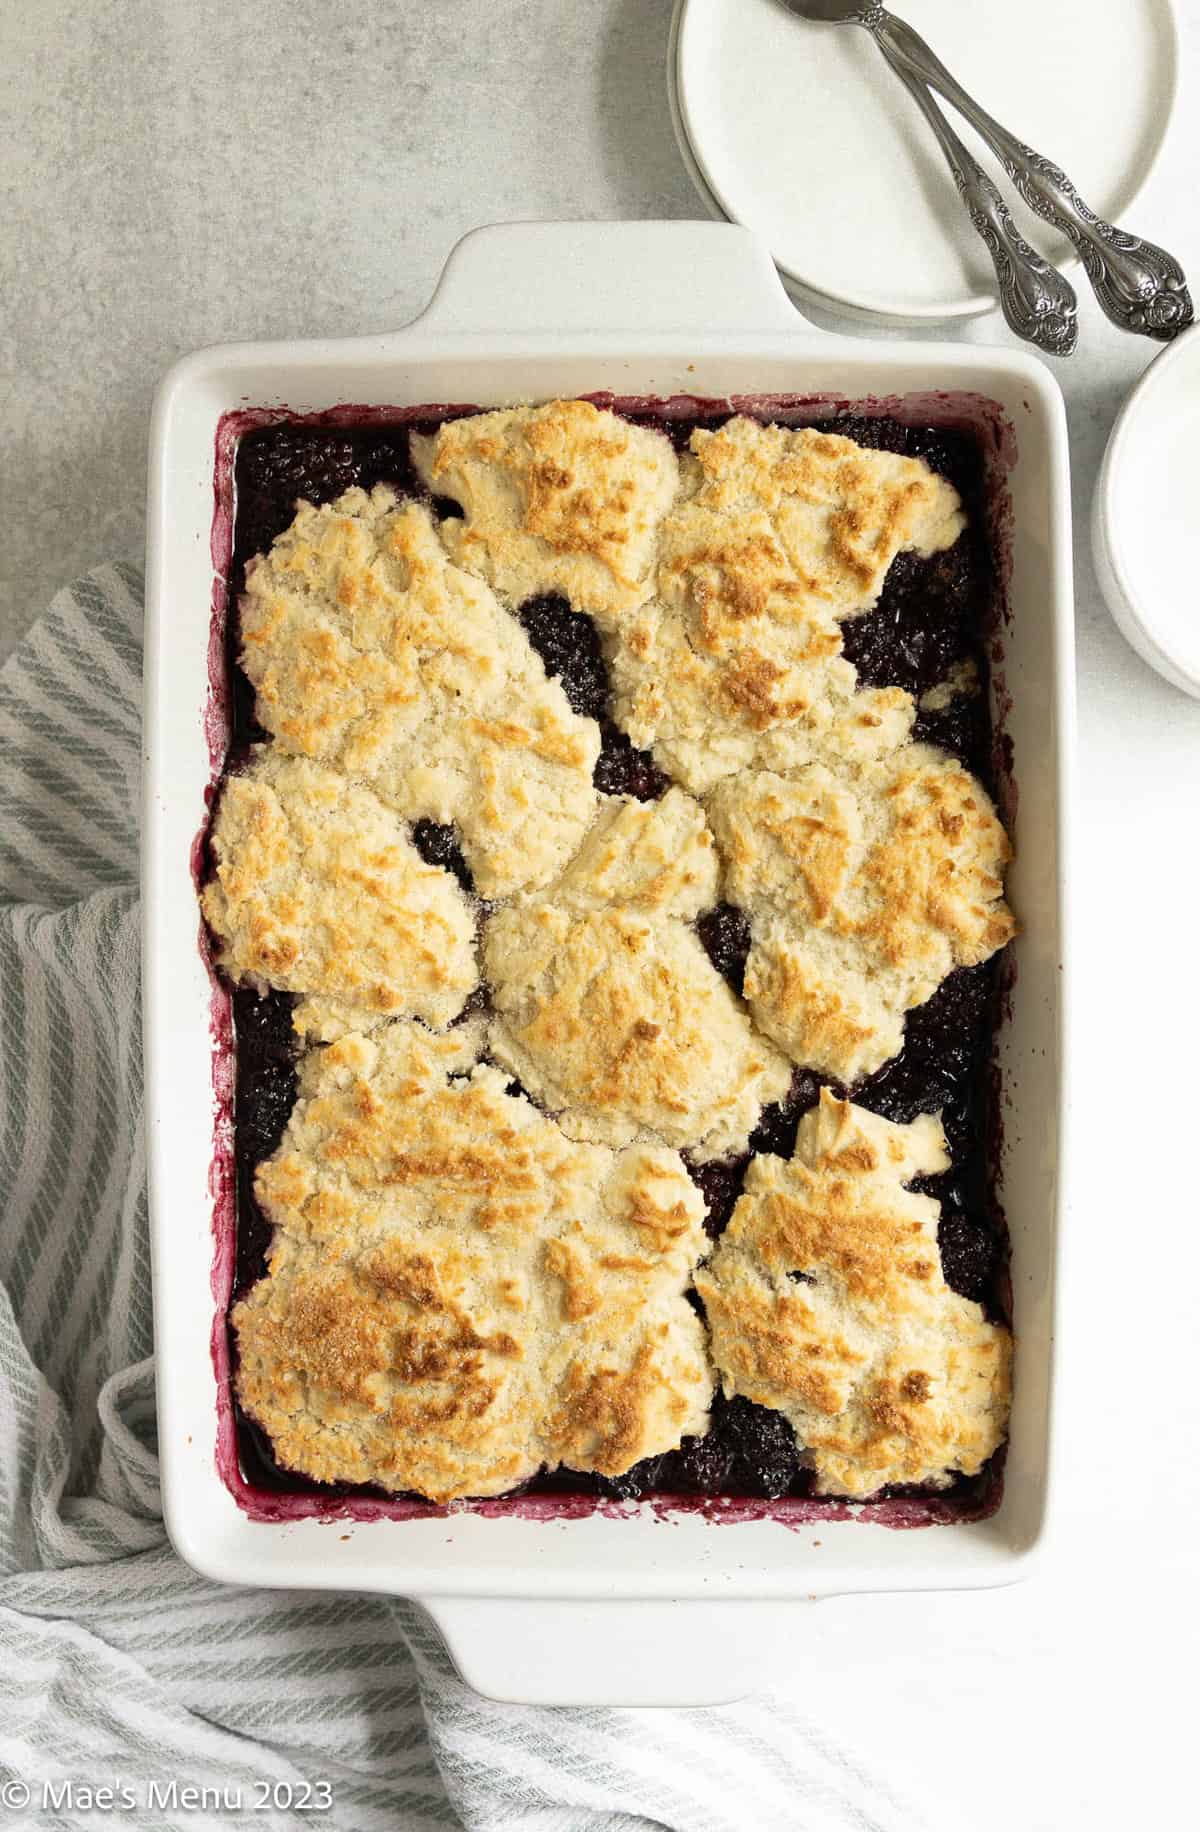 Gluten-free blackberry cobbler on the counter with a dish towel, plates, and a fork.